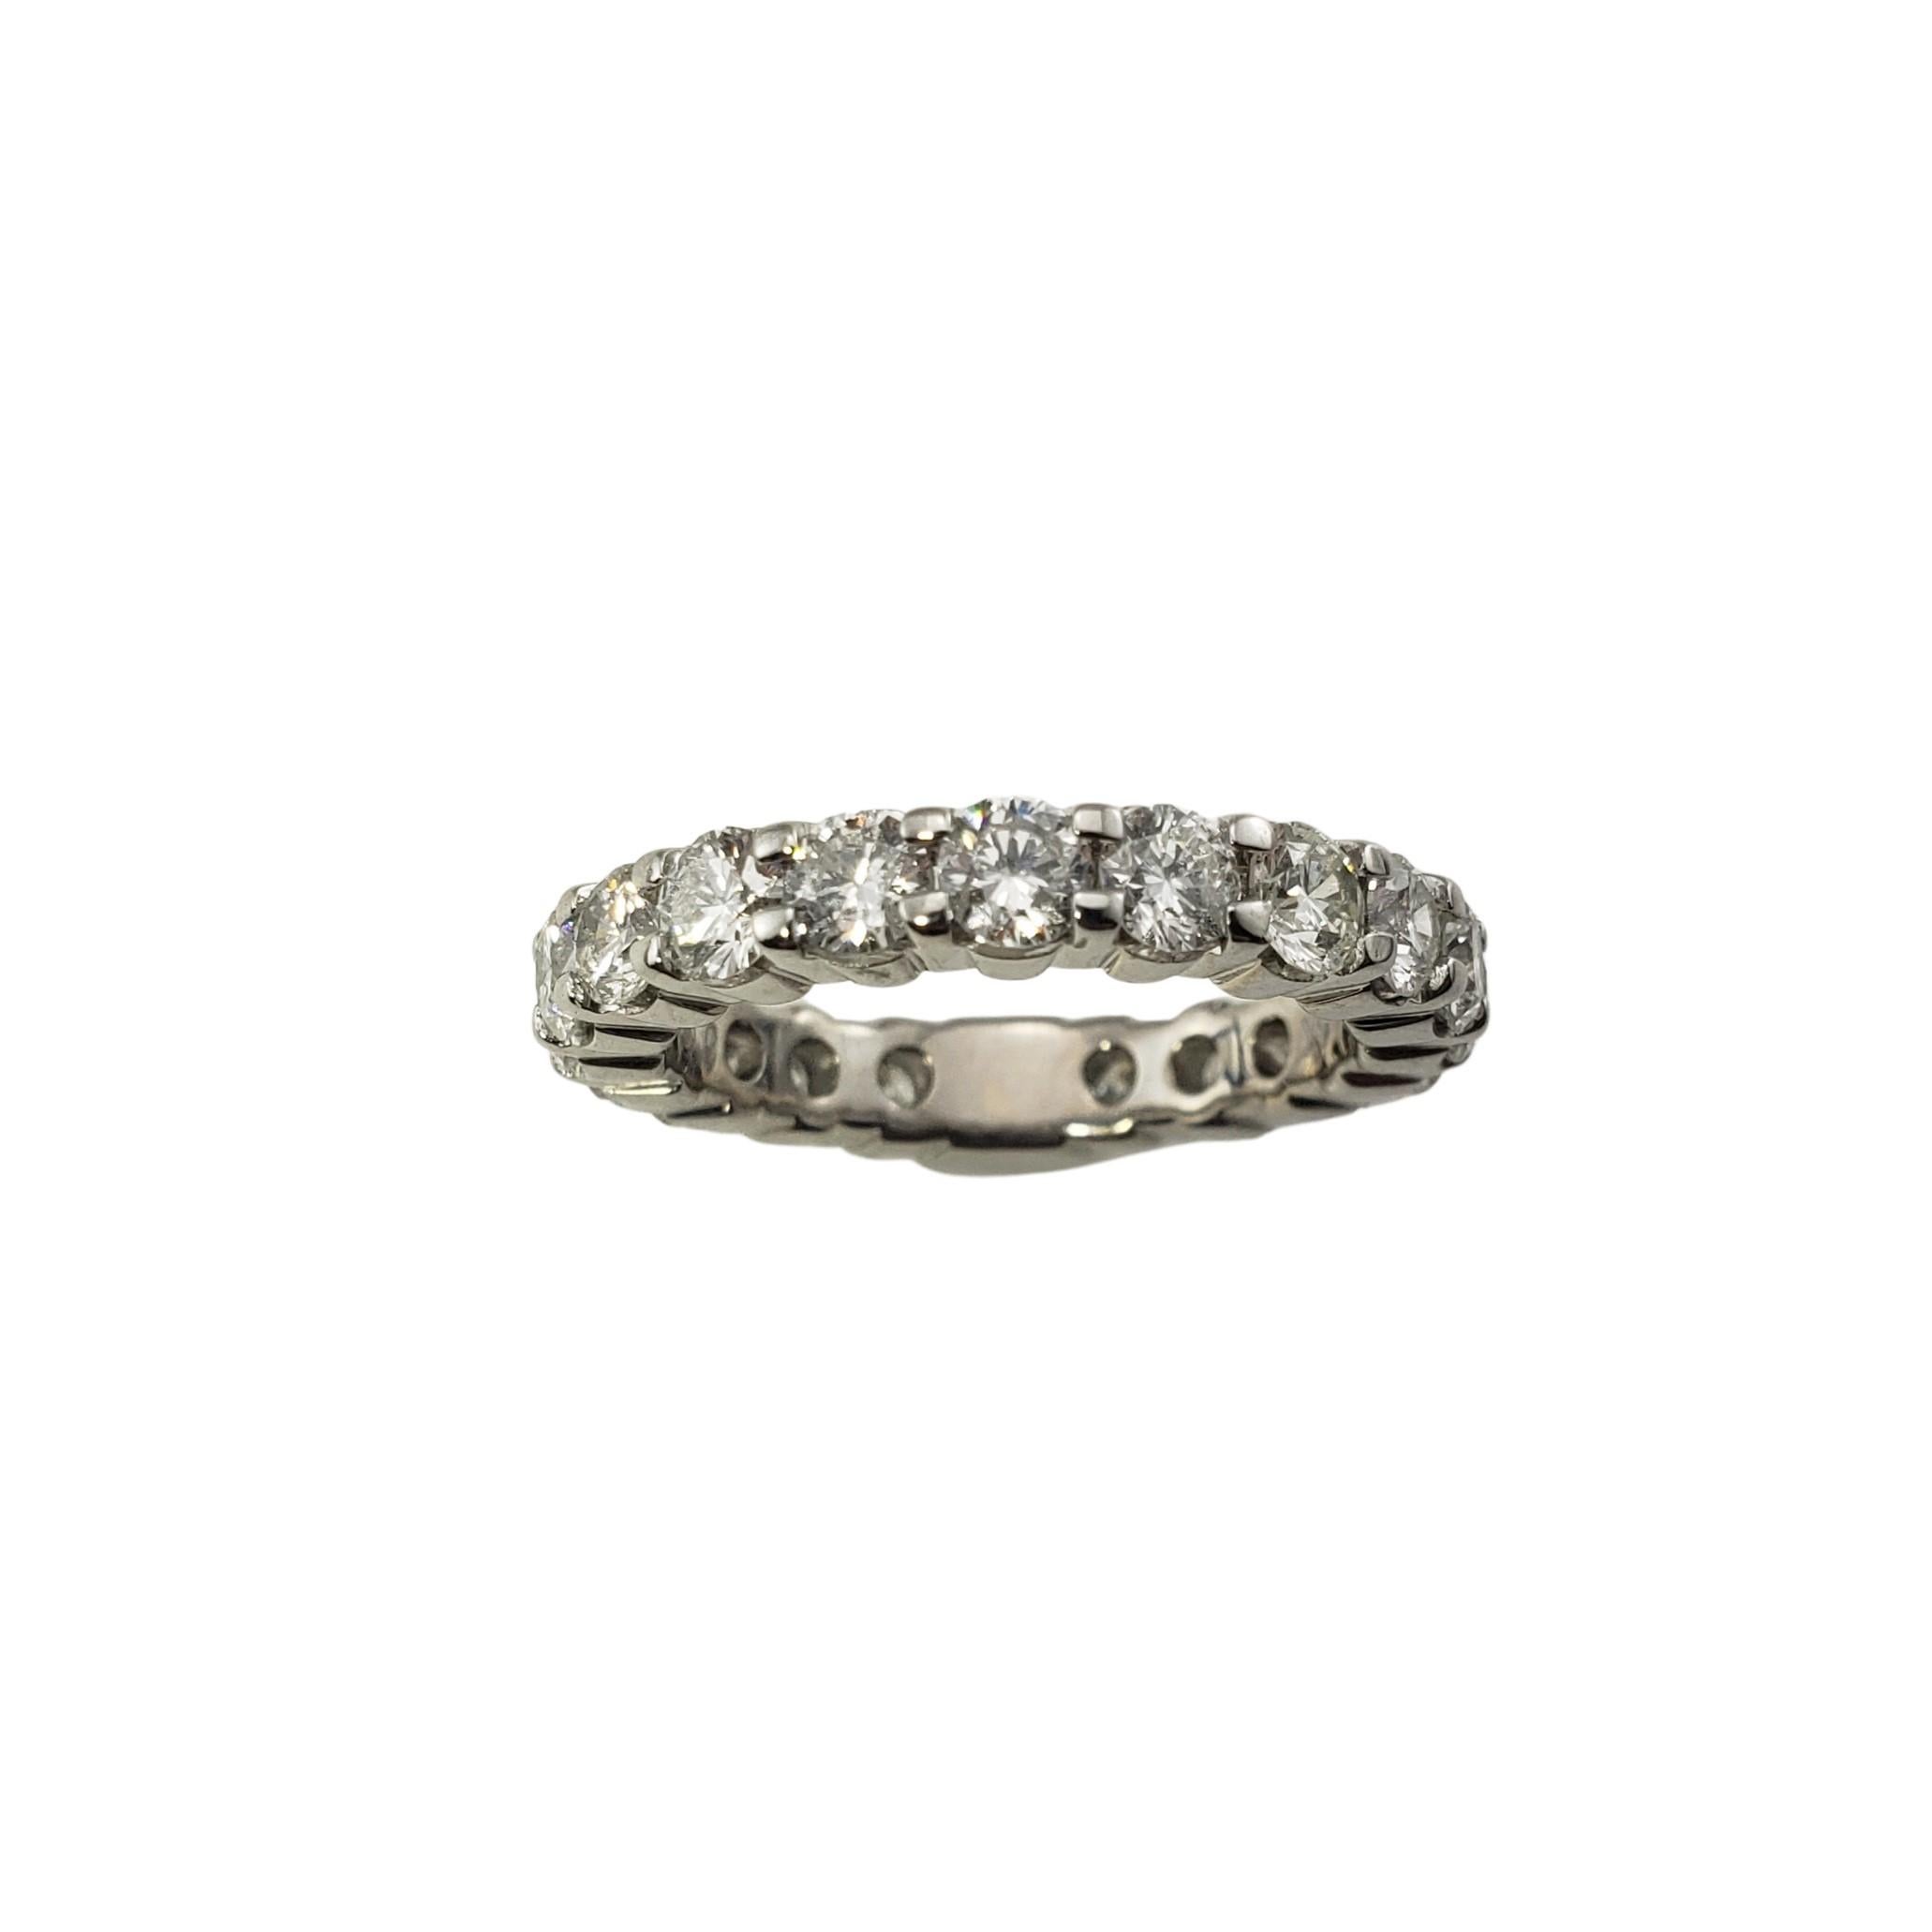 14 Karat White Gold Diamond Eternity Band Ring Size 7-

This sparkling eternity band features 19 round brilliant cut diamond set in classic 14K white gold.  With:  4 mm.

Approximate total diamond weight:  2.85 ct.

Diamond color:  H-I

Diamond